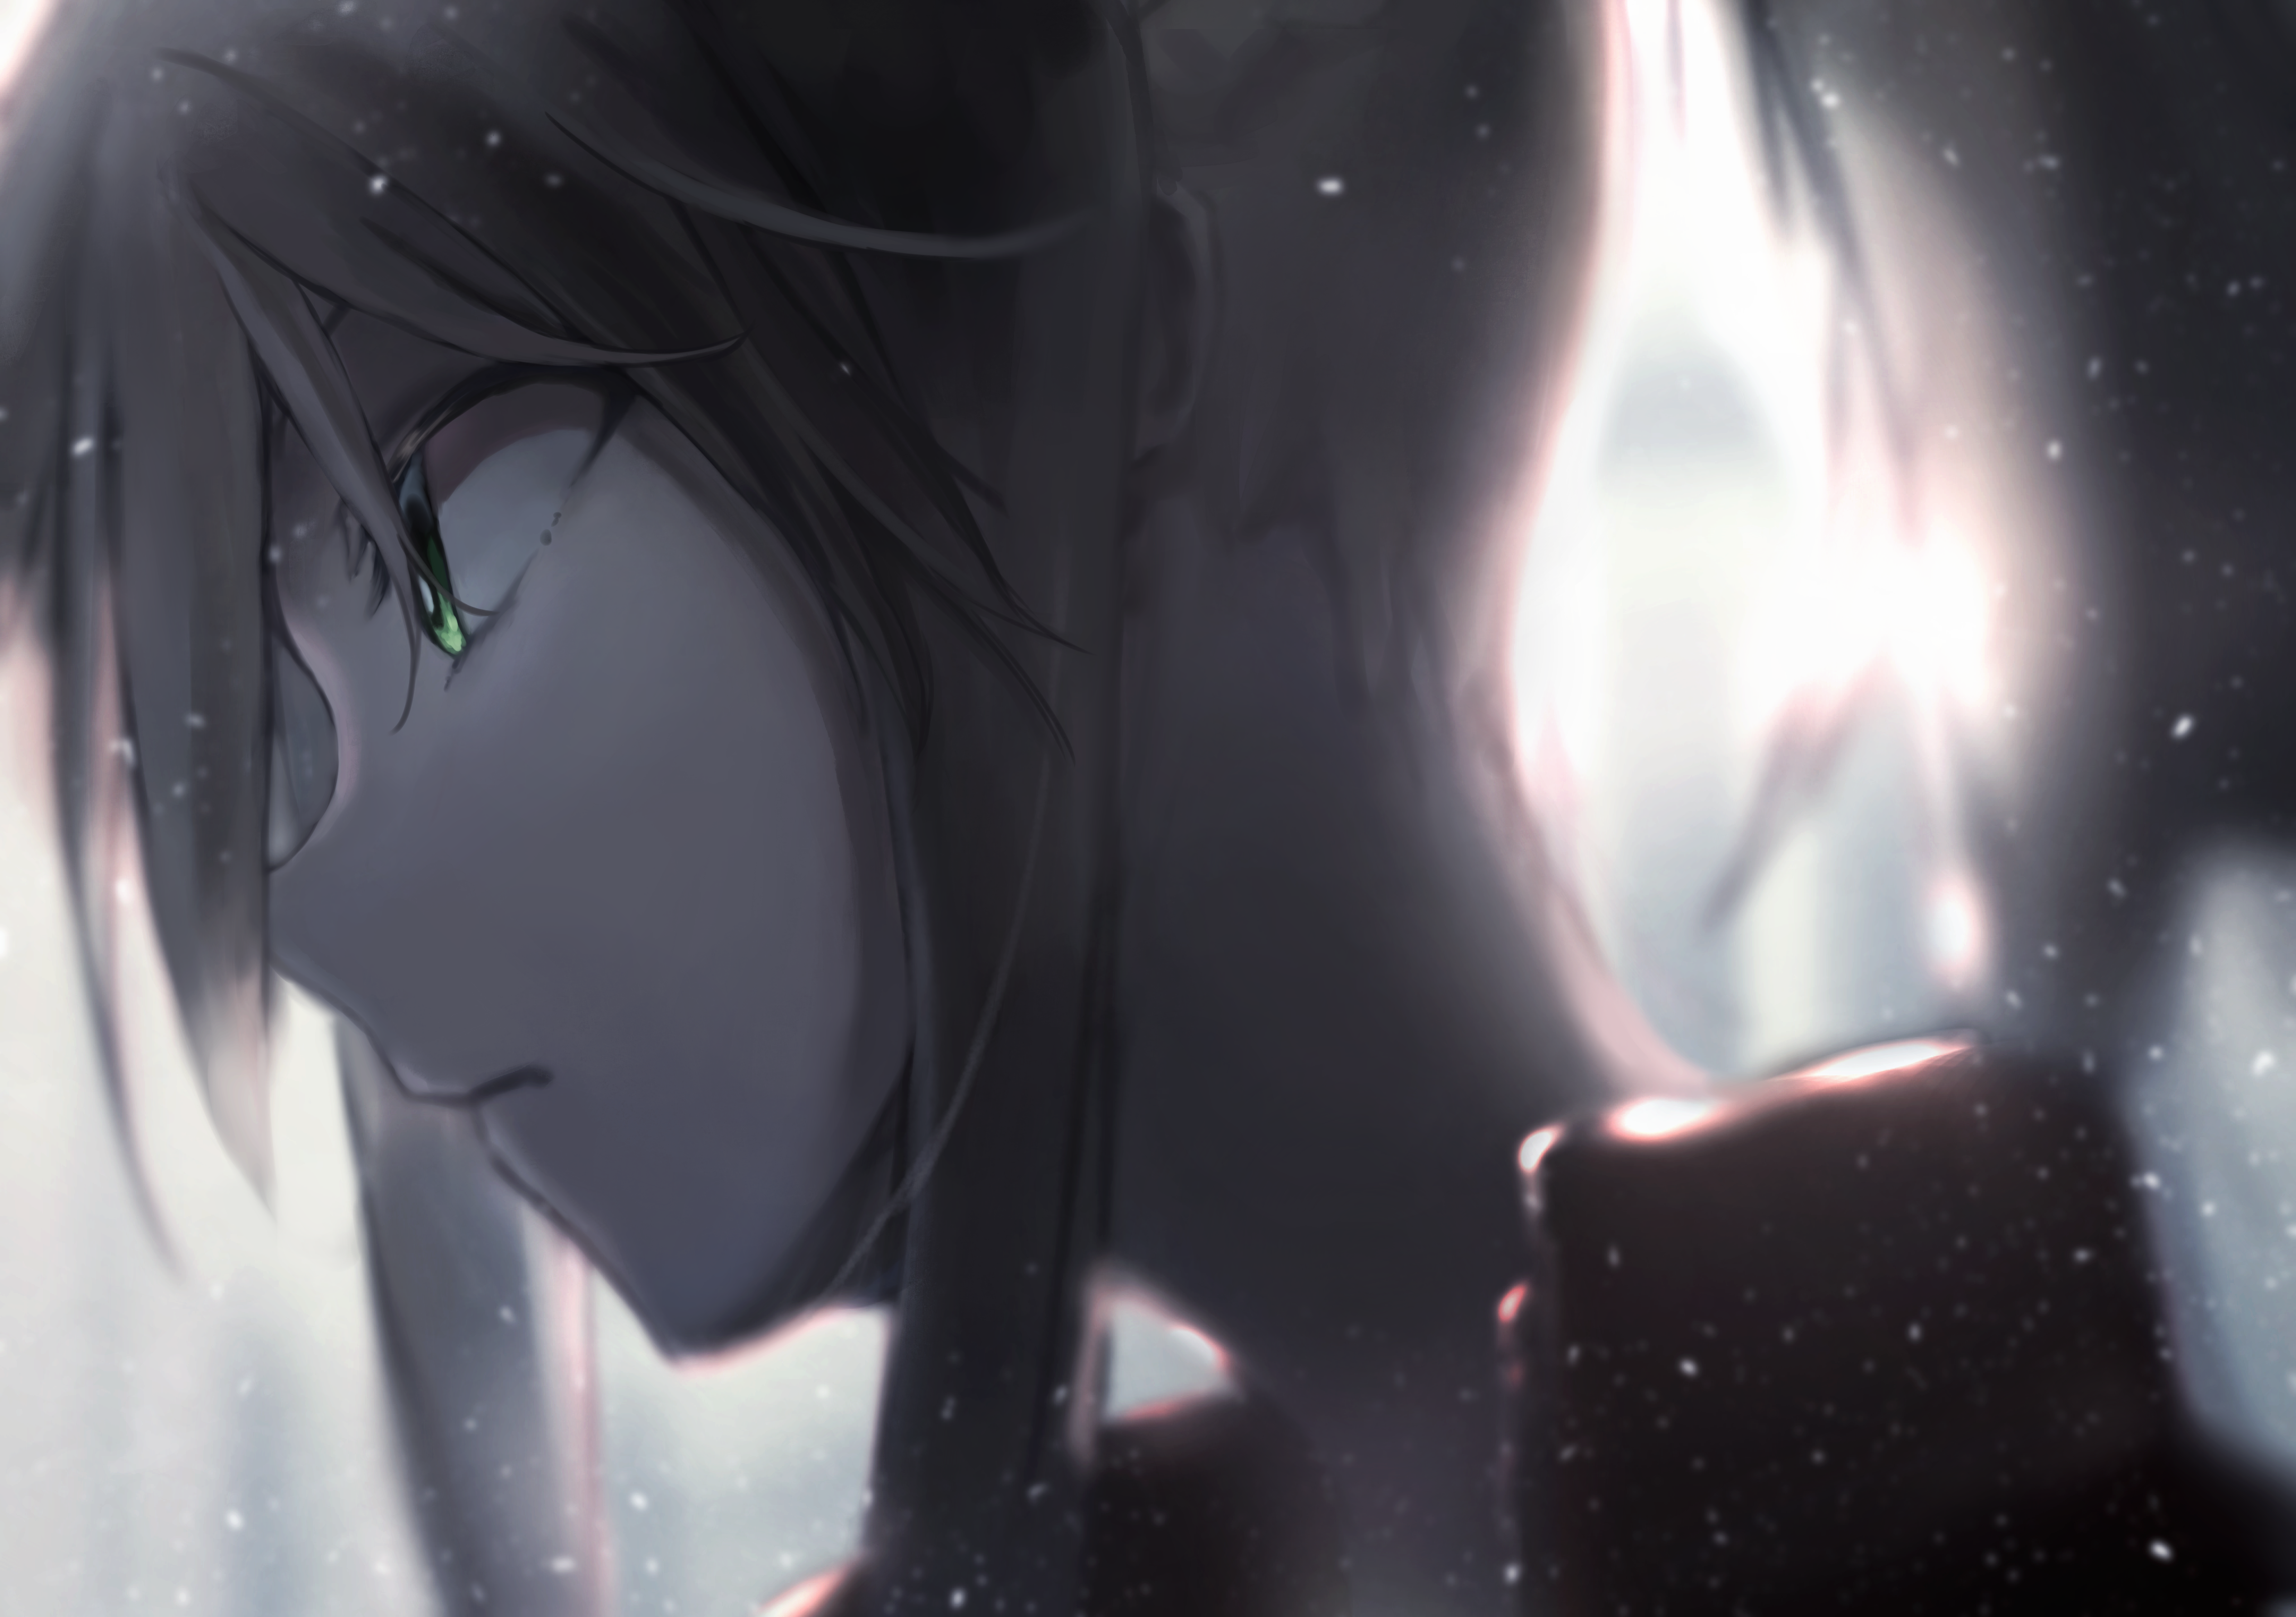 Fate Series FGO Fate Apocrypha Monochrome Red Jackets Long Hair Ponytail Looking Away Anime Girls 2D 5065x3568